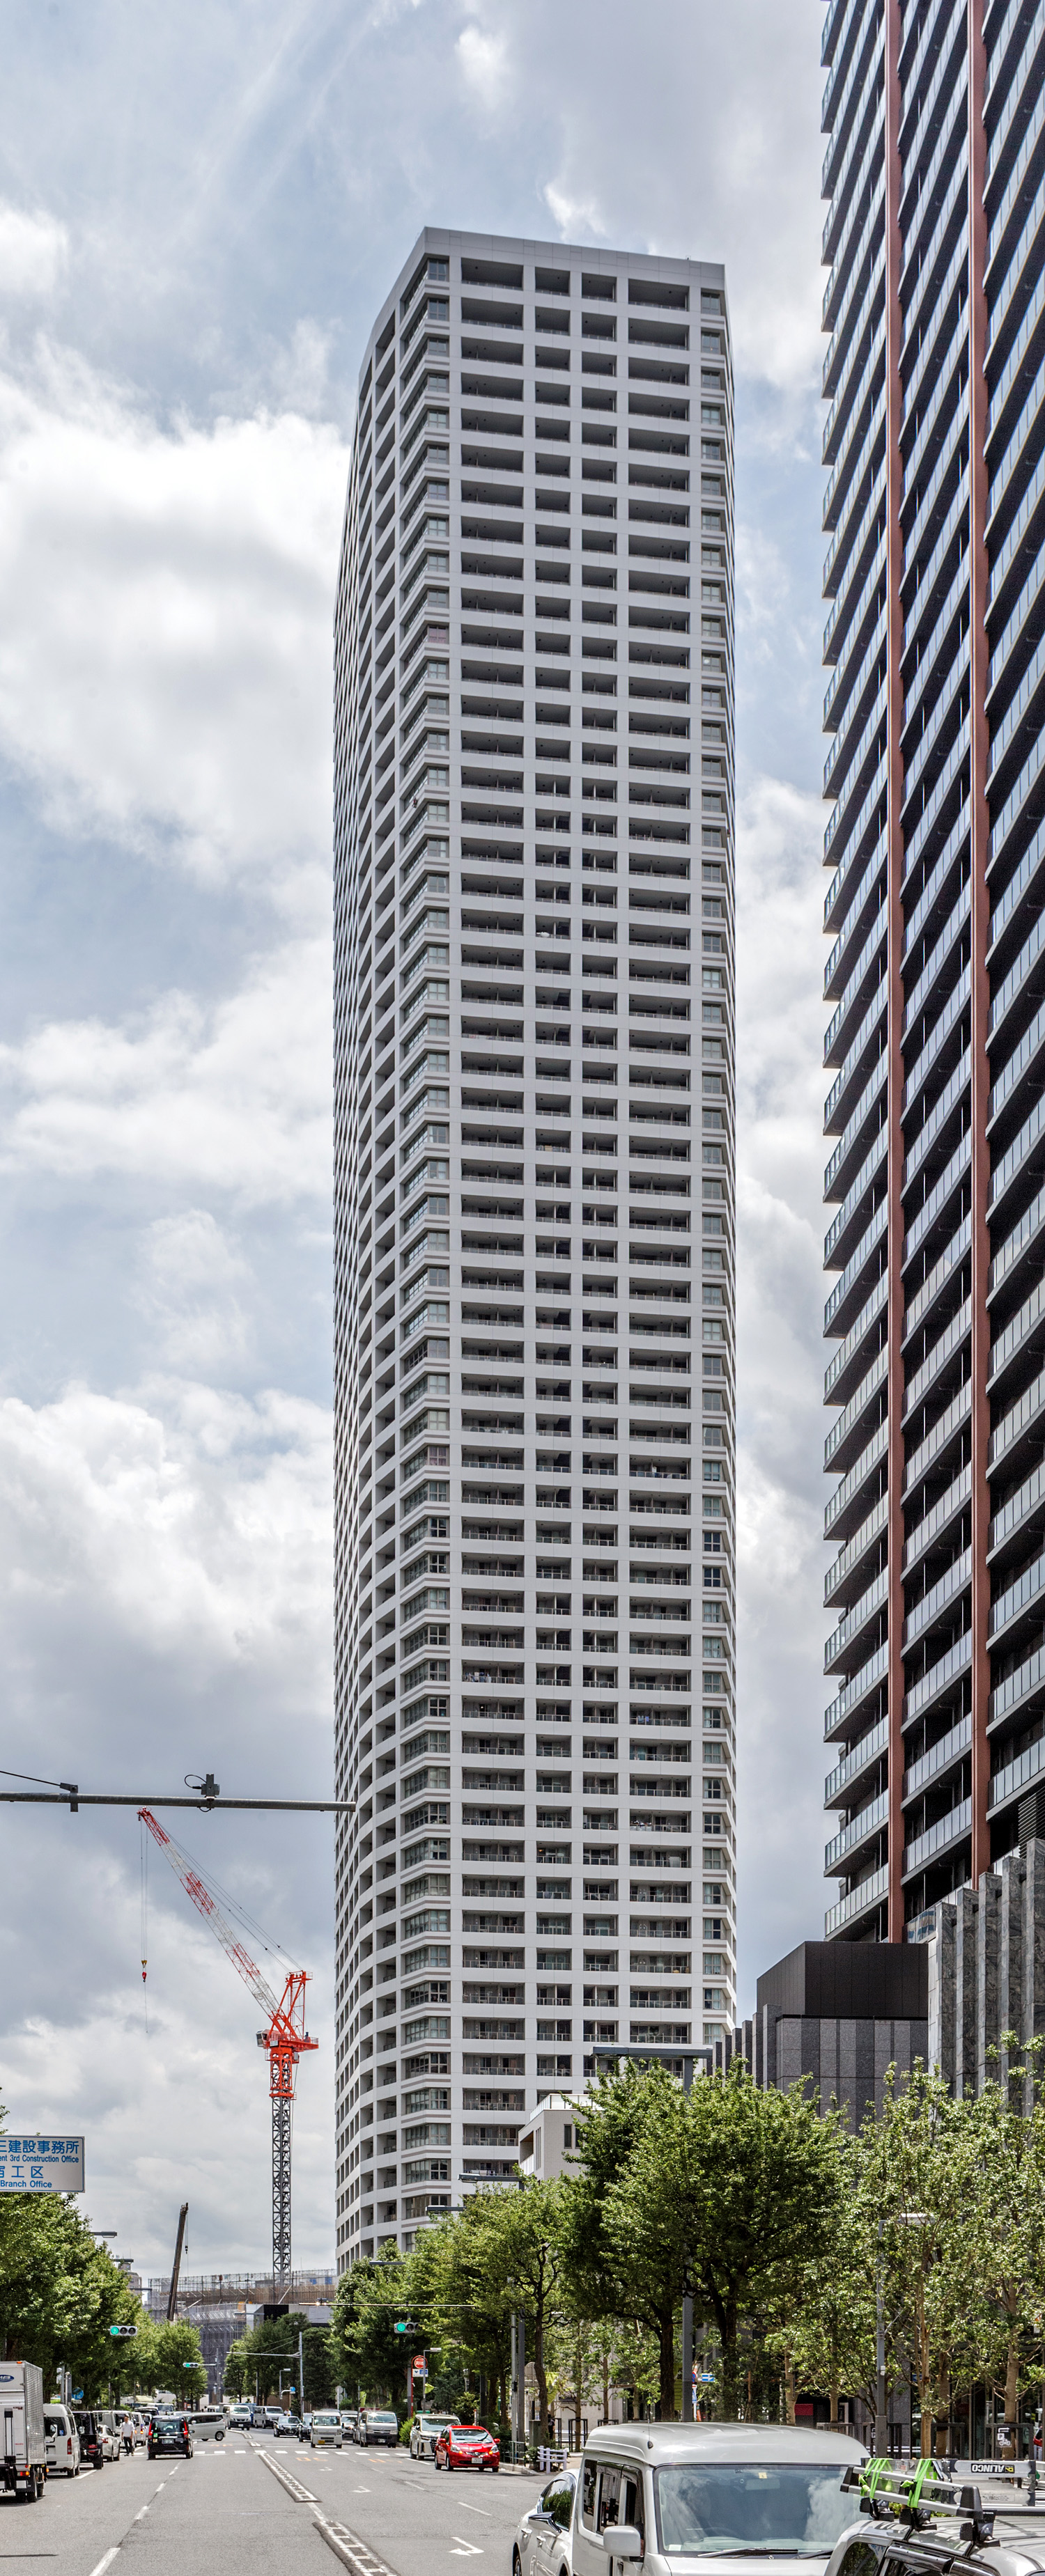 The Parkhouse Nishi Shinjuku Tower 60, Tokyo - View from the northeast. © Mathias Beinling